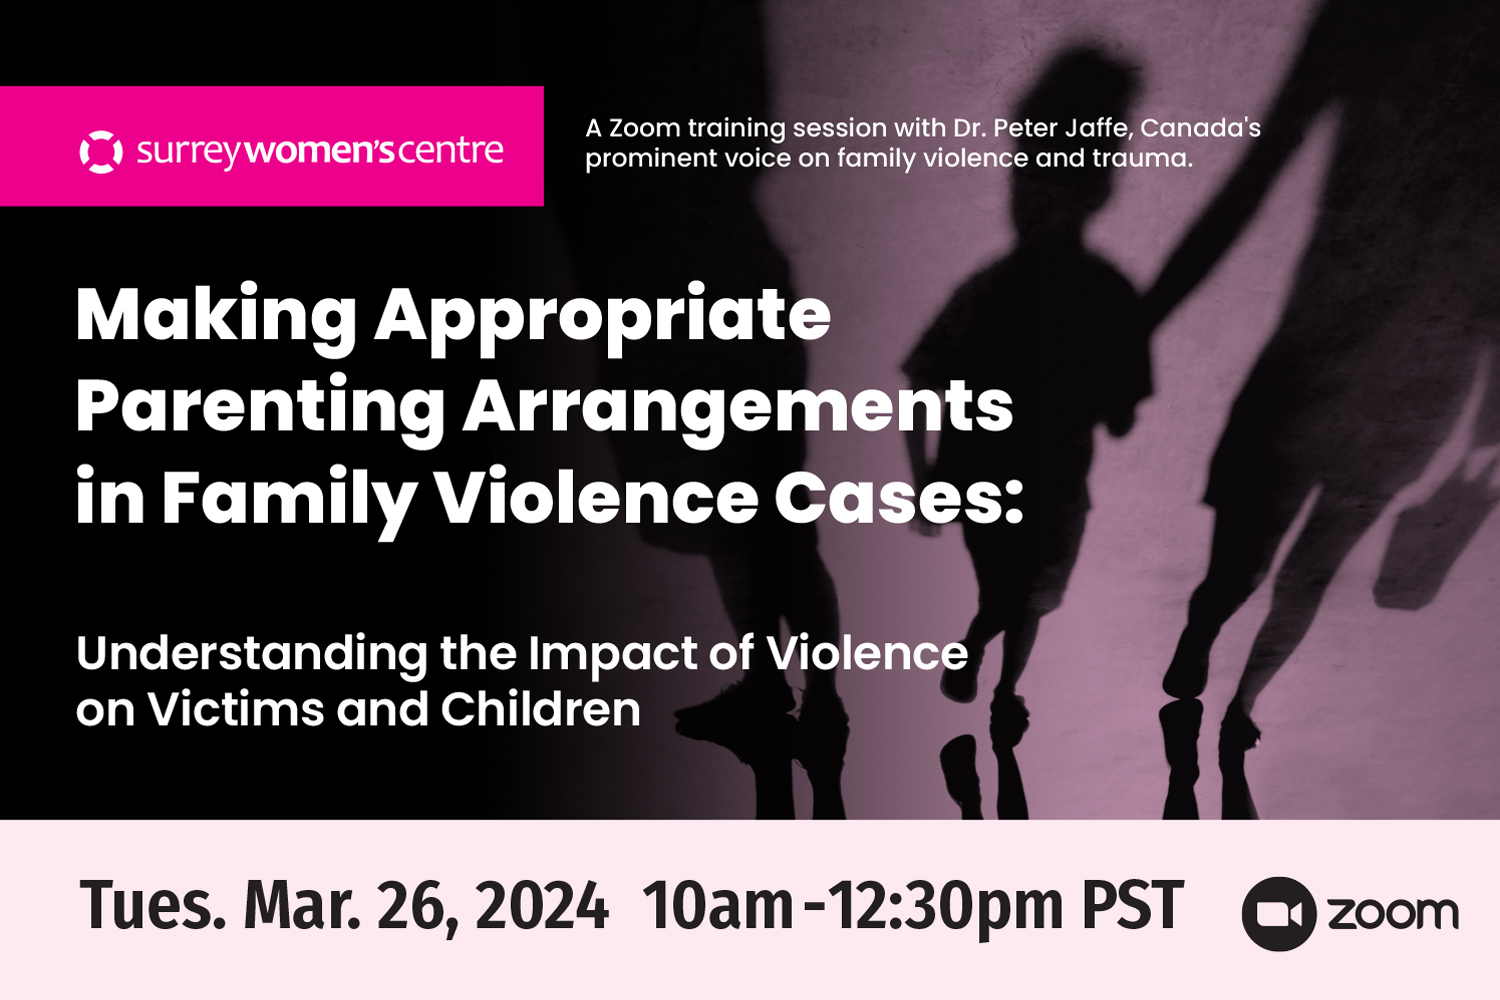 Making Appropriate Parenting Arrangements in Family Violence Cases